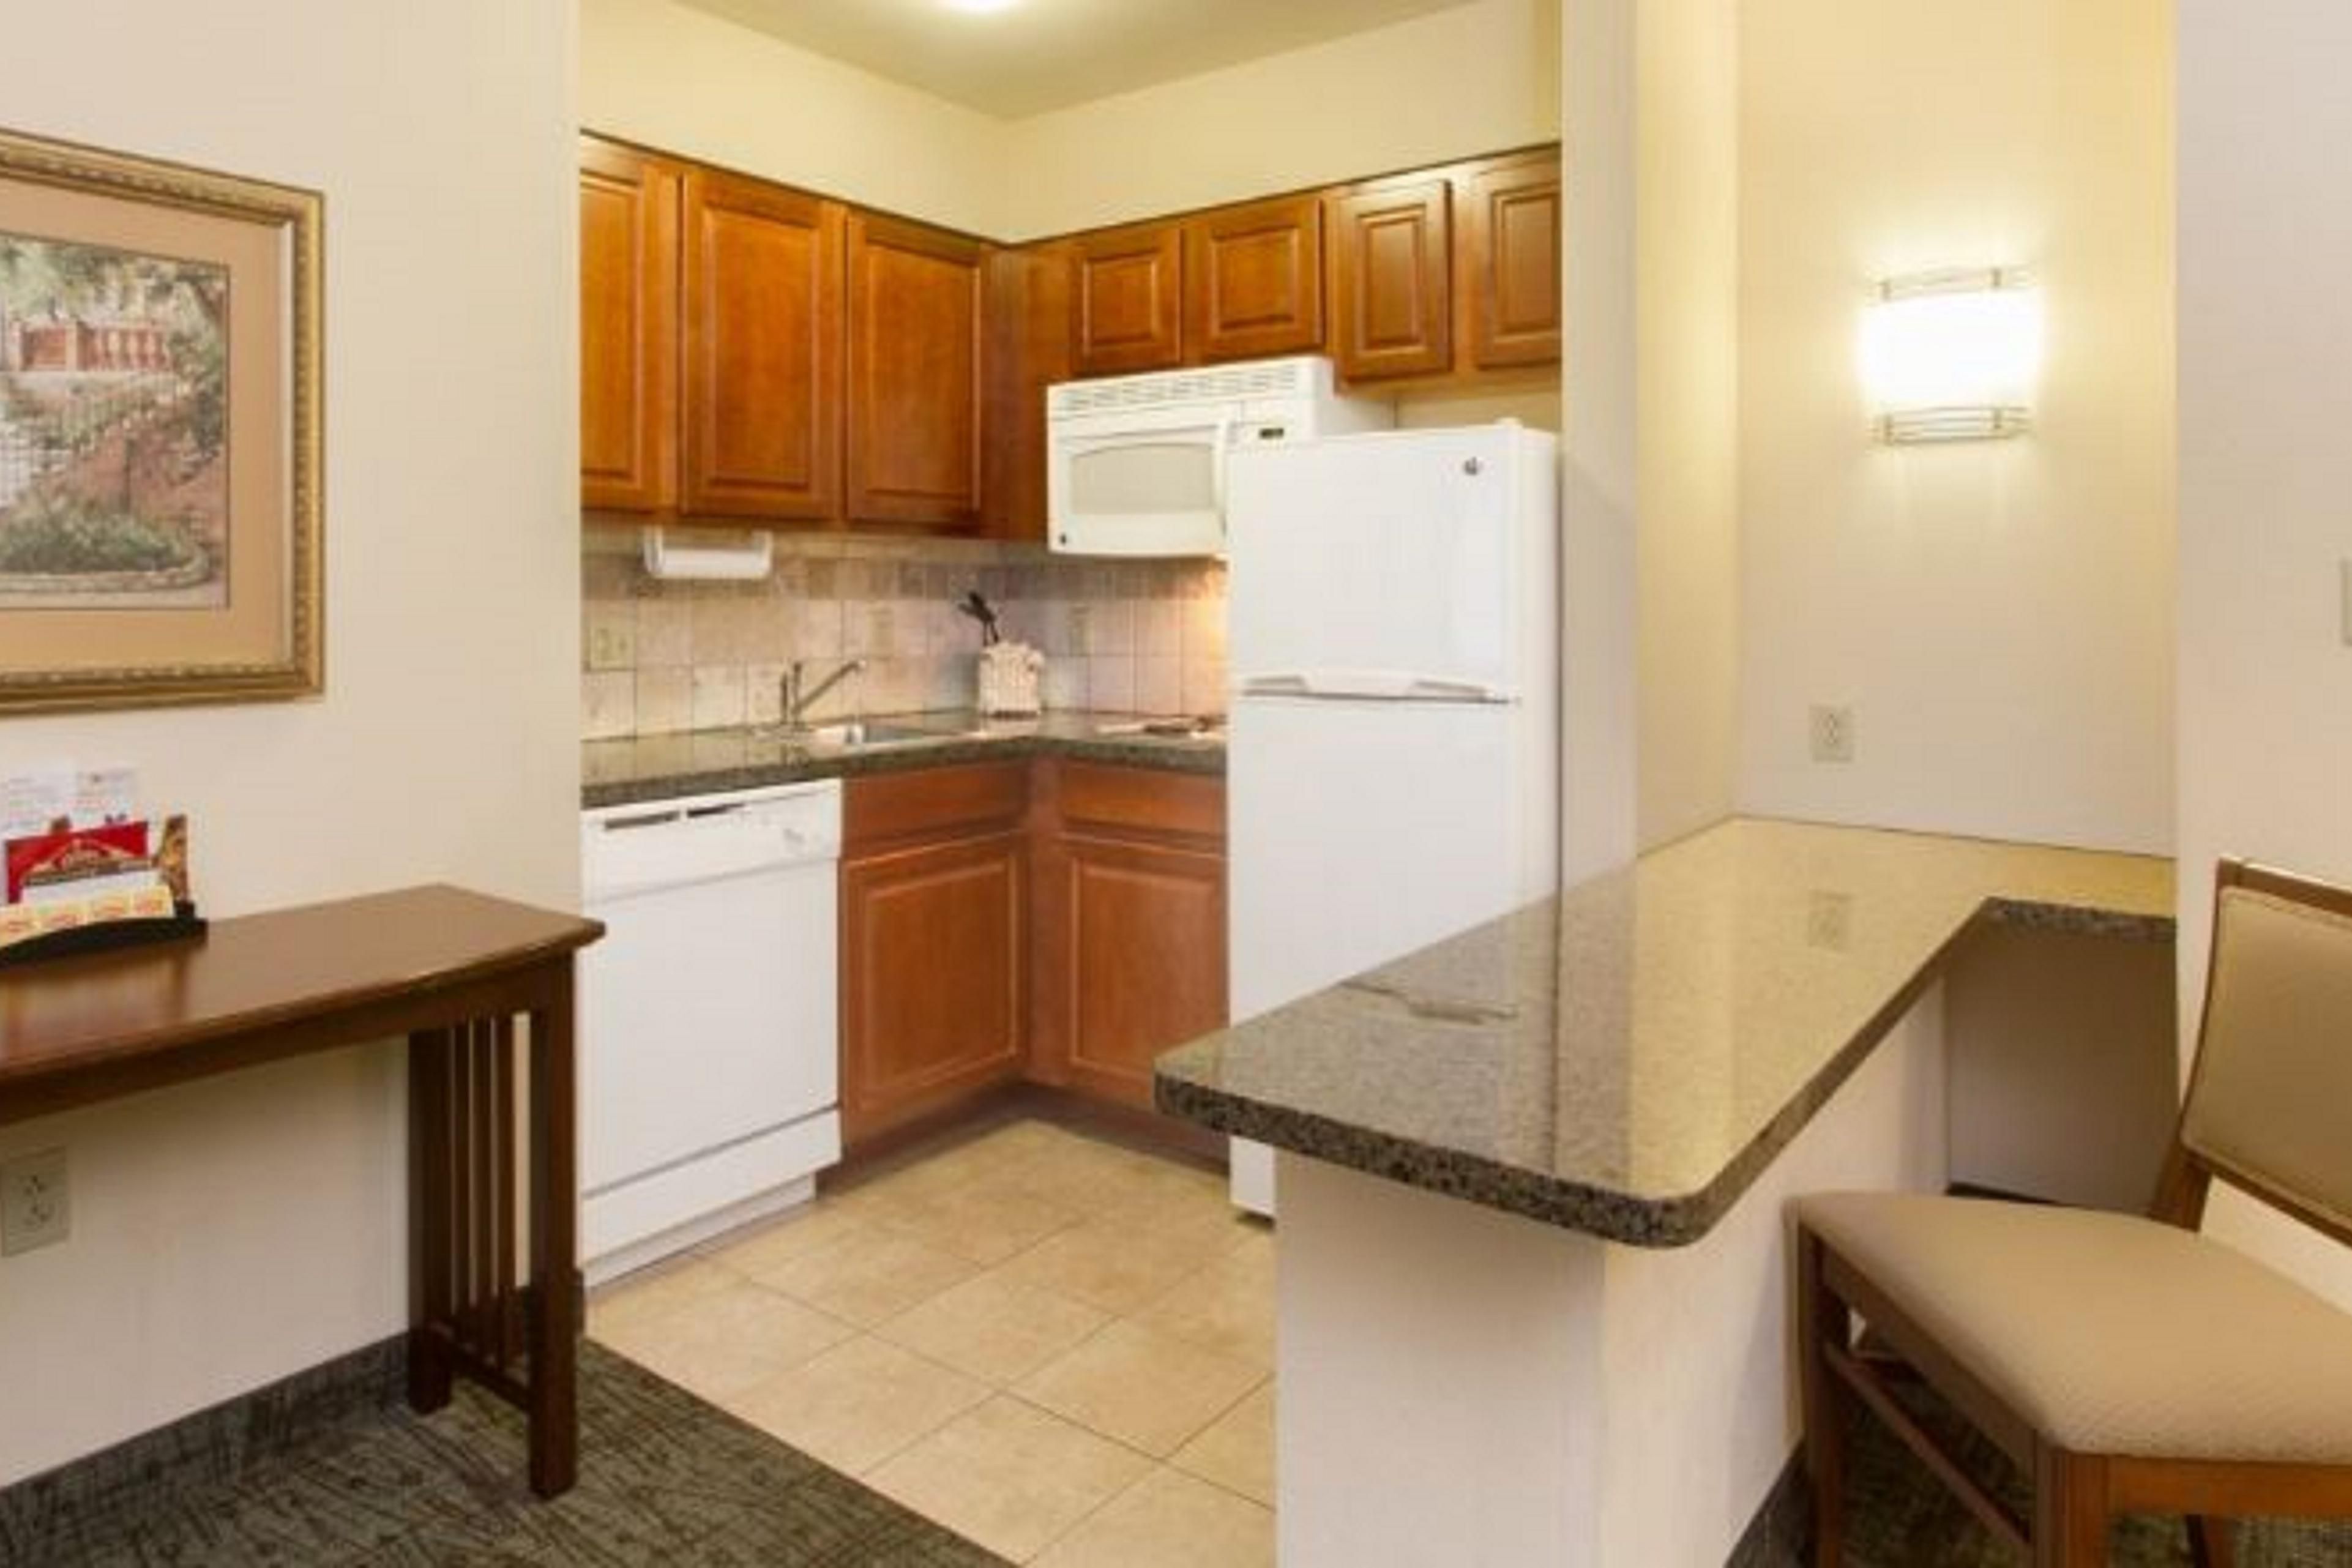 Our all-suite hotel comes with extra square footage and a fully equipped kitchen in every room. Kitchens include a stovetop, full-size fridge, microwave, dishwasher, sink with the garbage disposal, cookware, dinnerware and serve ware.